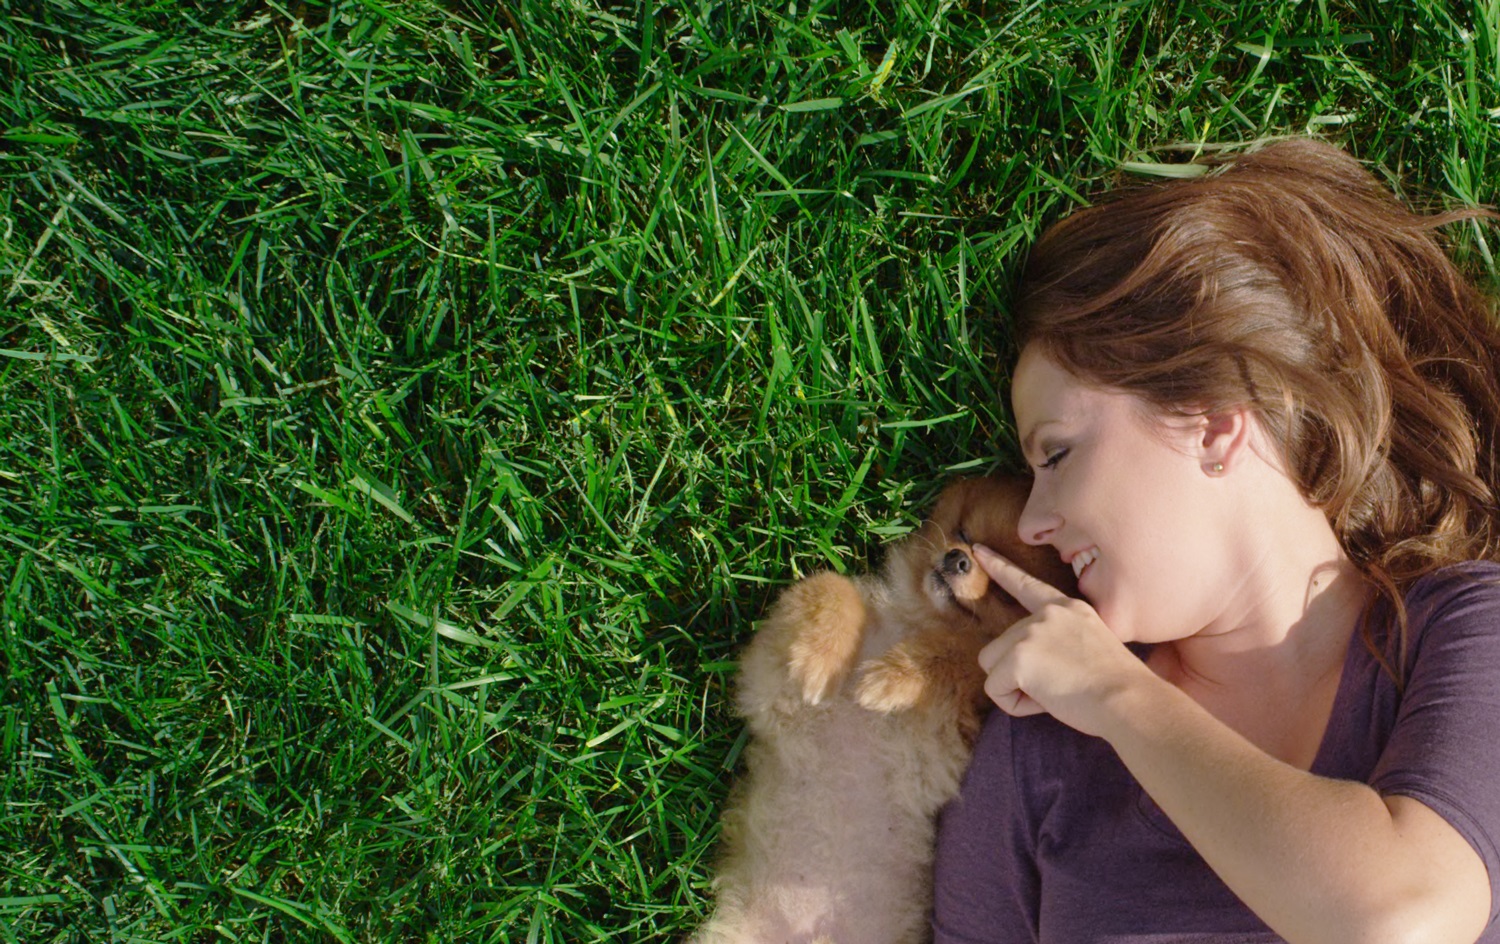 Pretty Woman playing with cute puppy on manicured green grass showing lawn care in Rochester